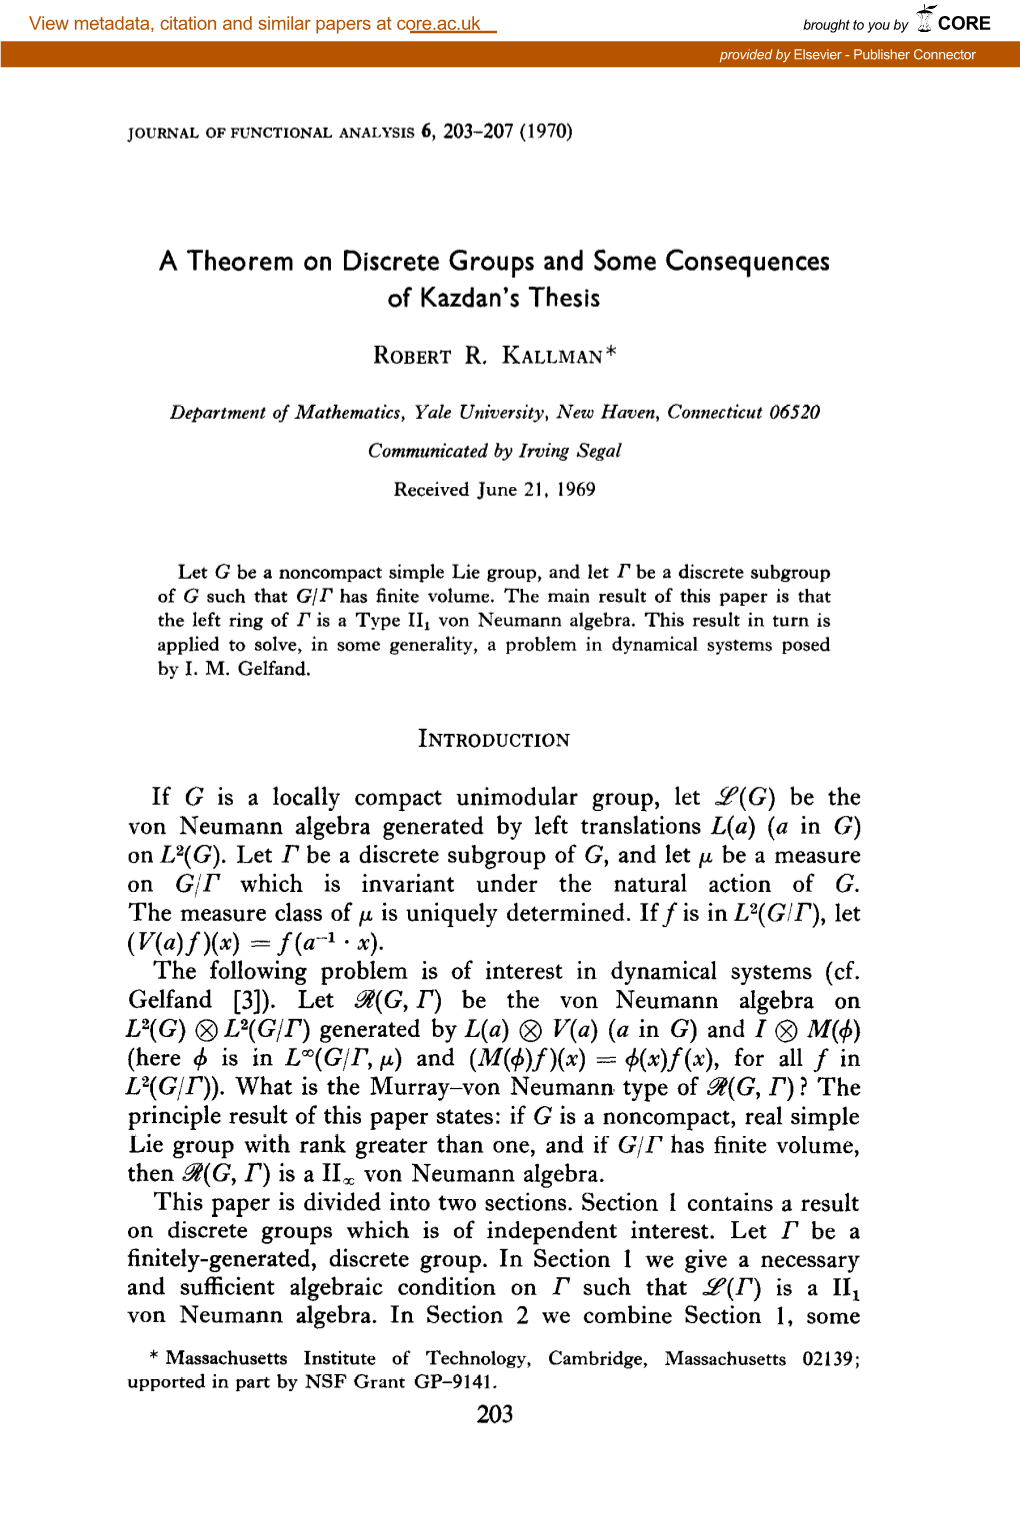 A Theorem on Discrete Groups and Some Consequences of Kazdan's